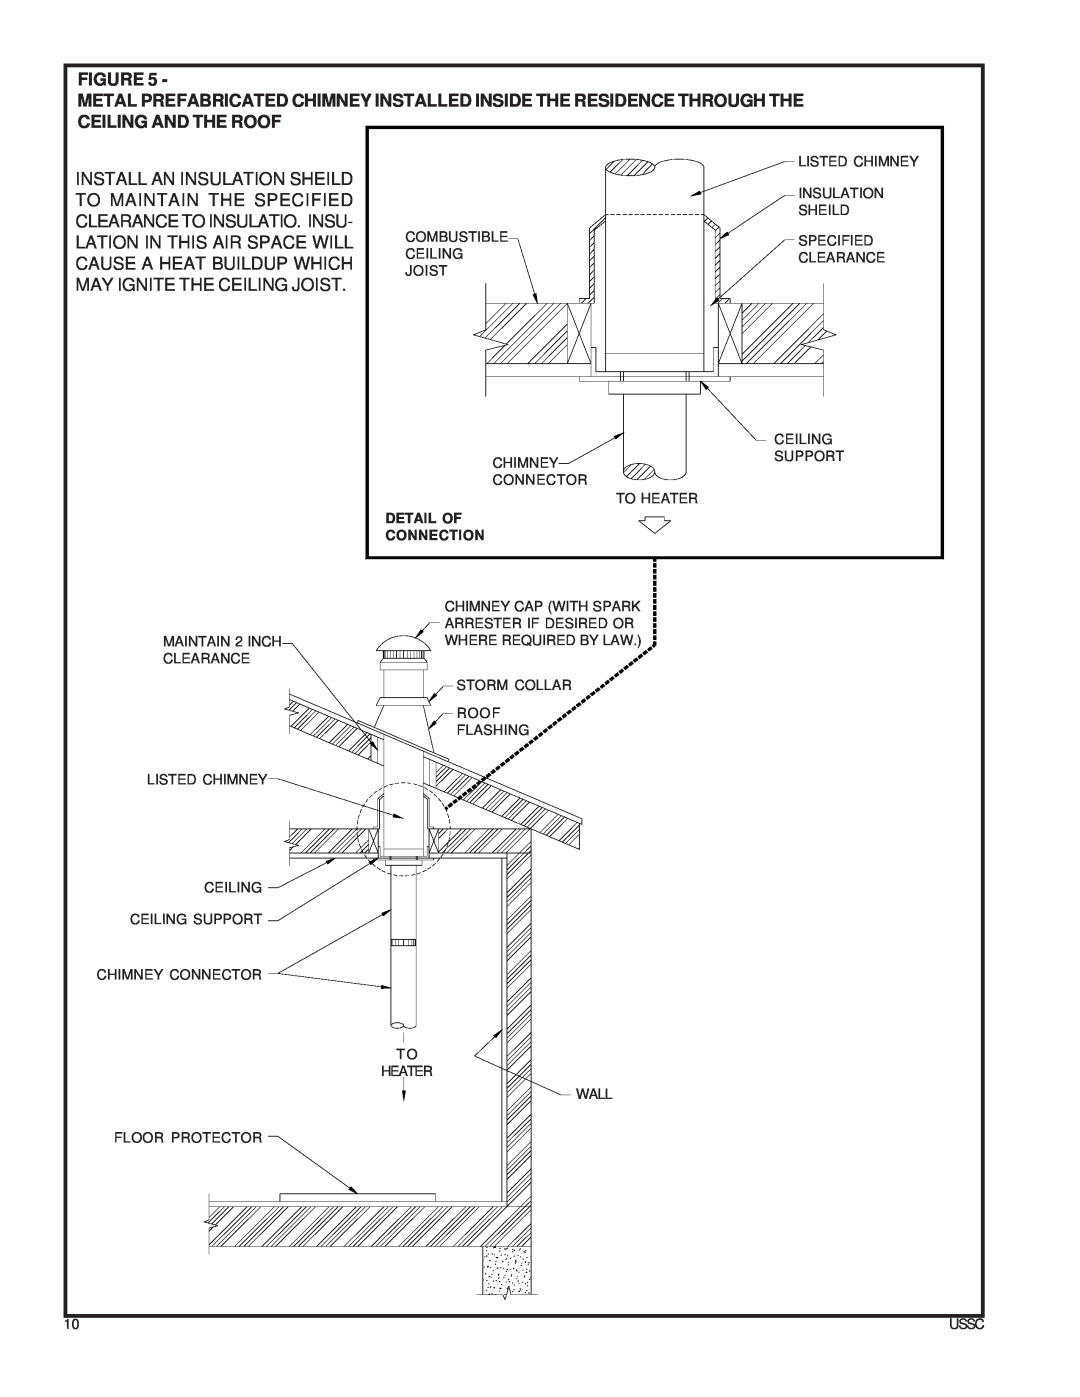 United States Stove ASA7, 4027 owner manual Detail Of Connection, Ussc 